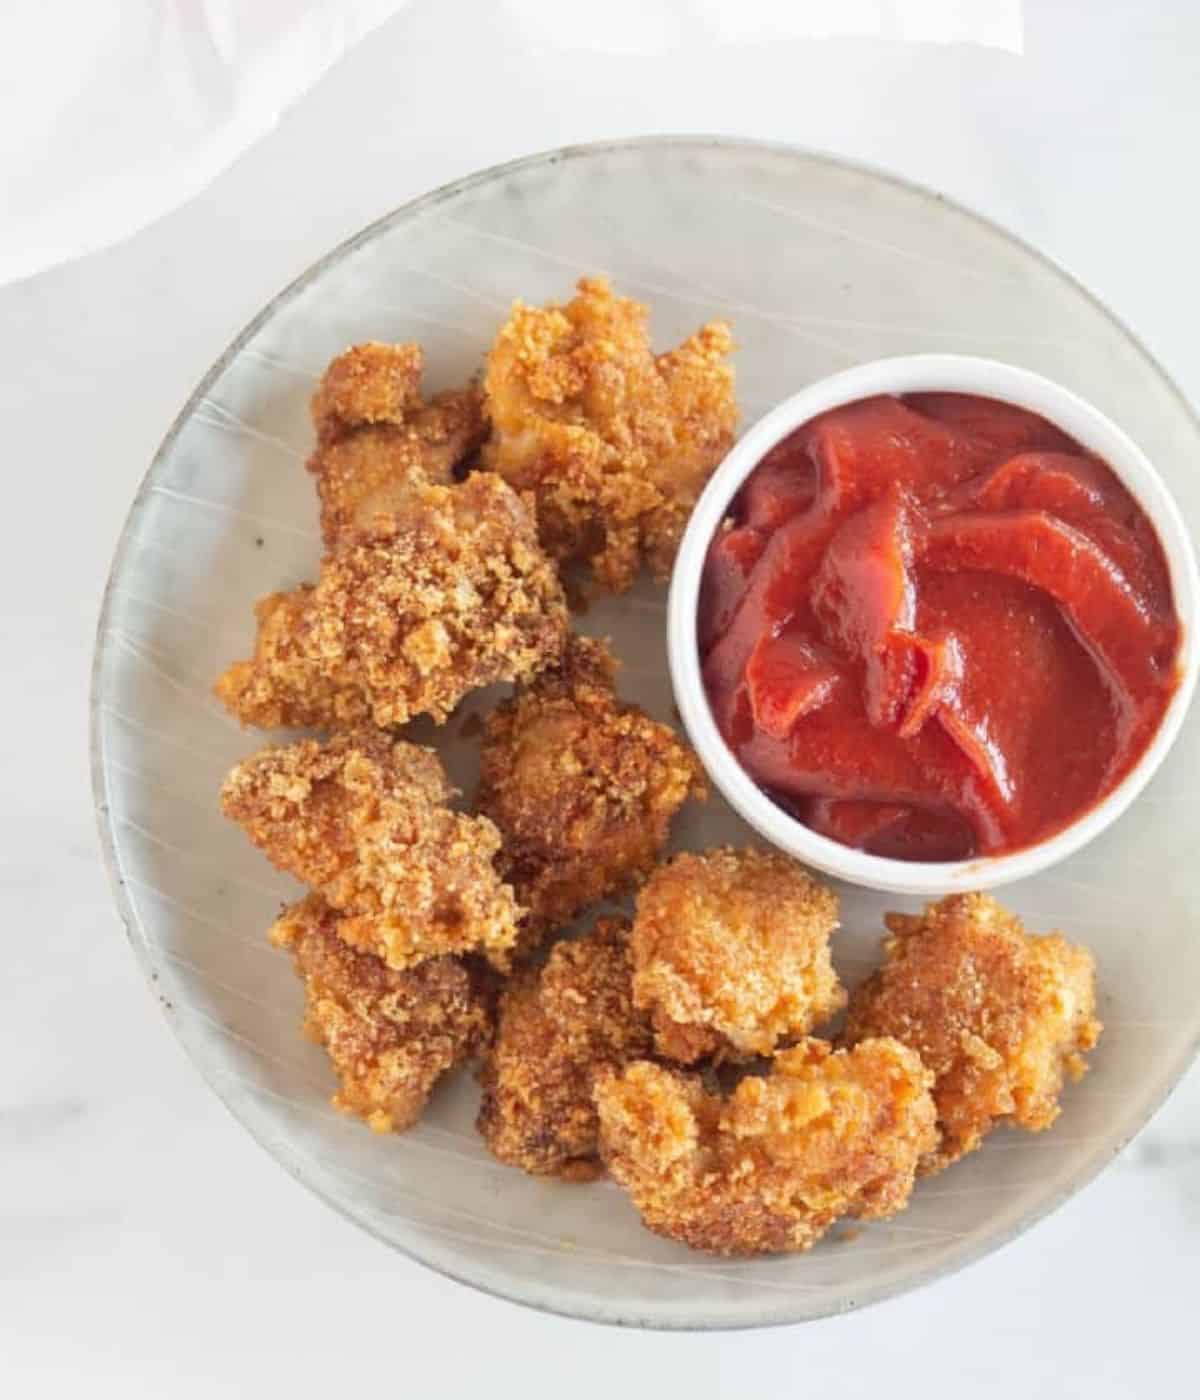 chicken nuggets on plate with ketchup.